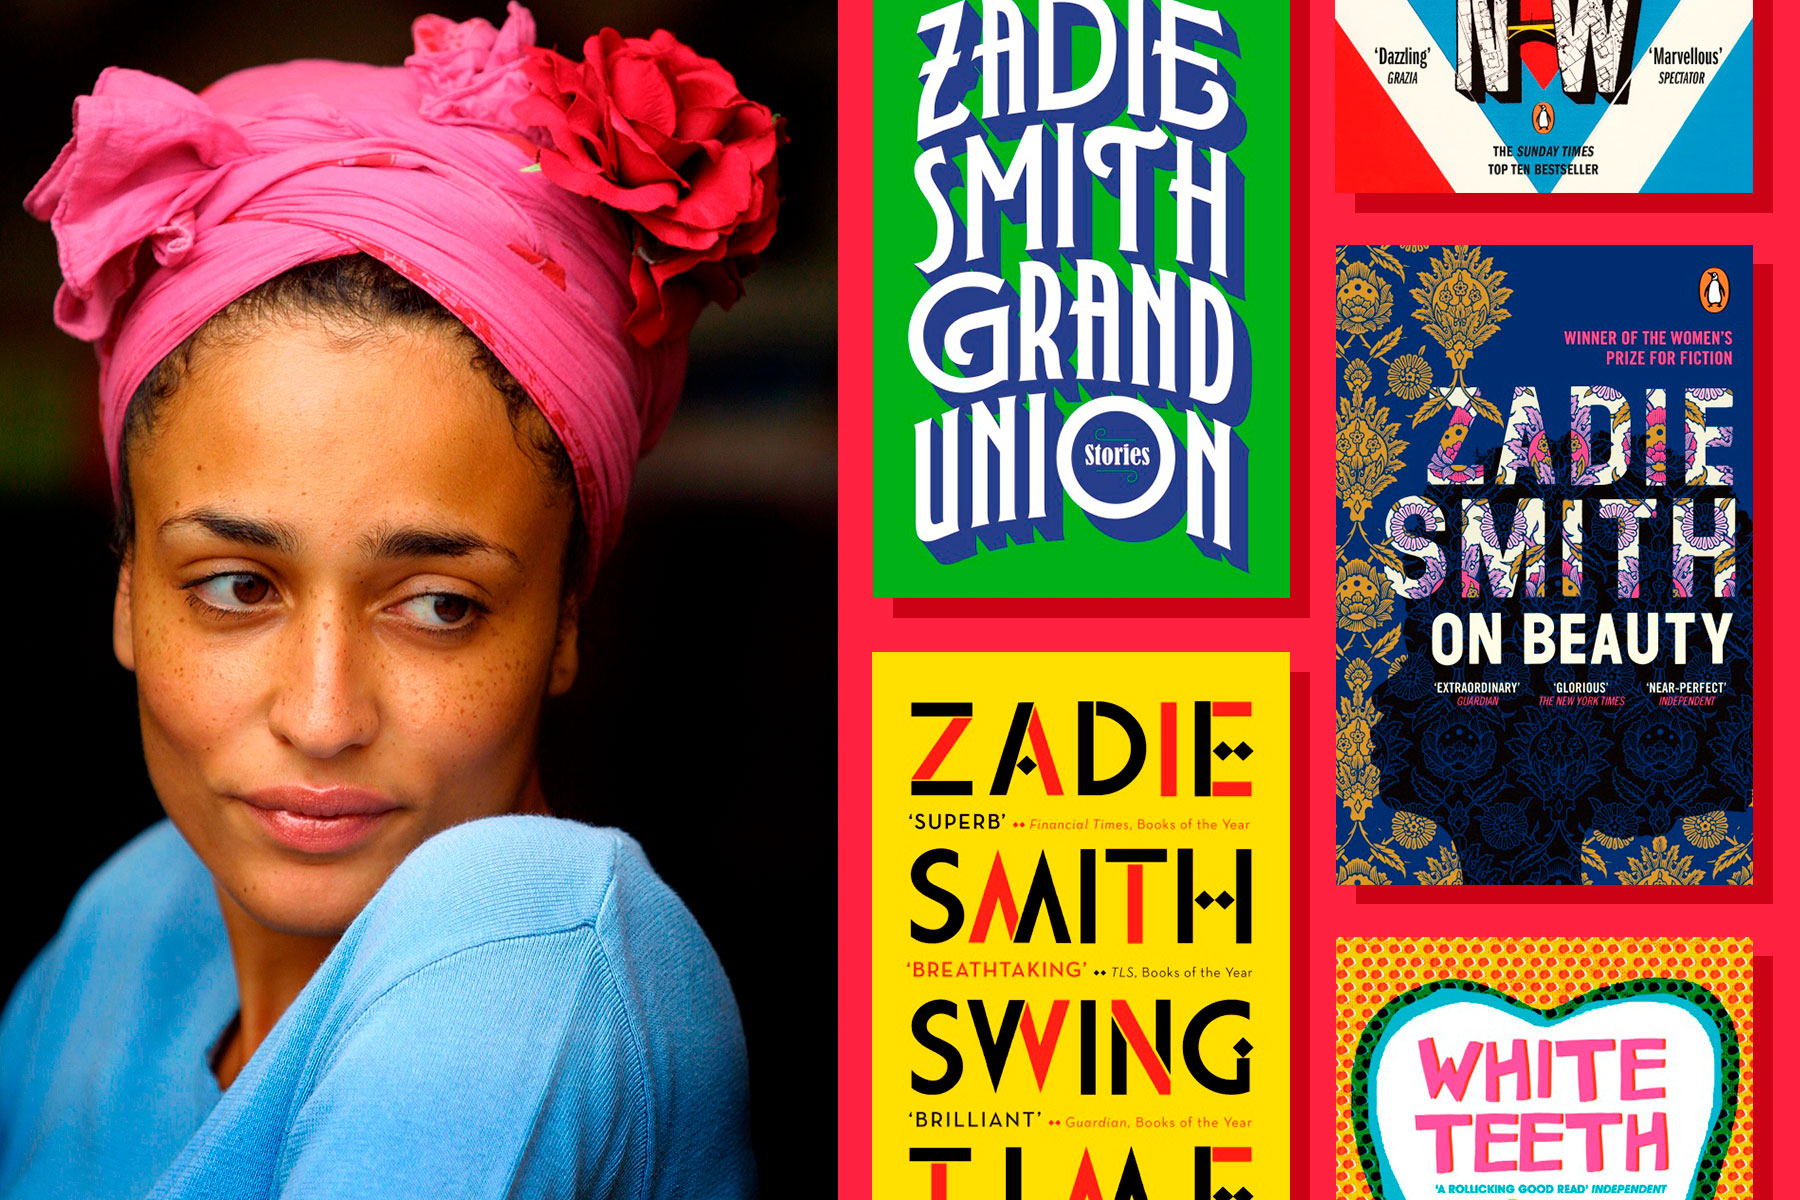 Zadie Smith's books include novels and essay collections. Image of Smith: Getty